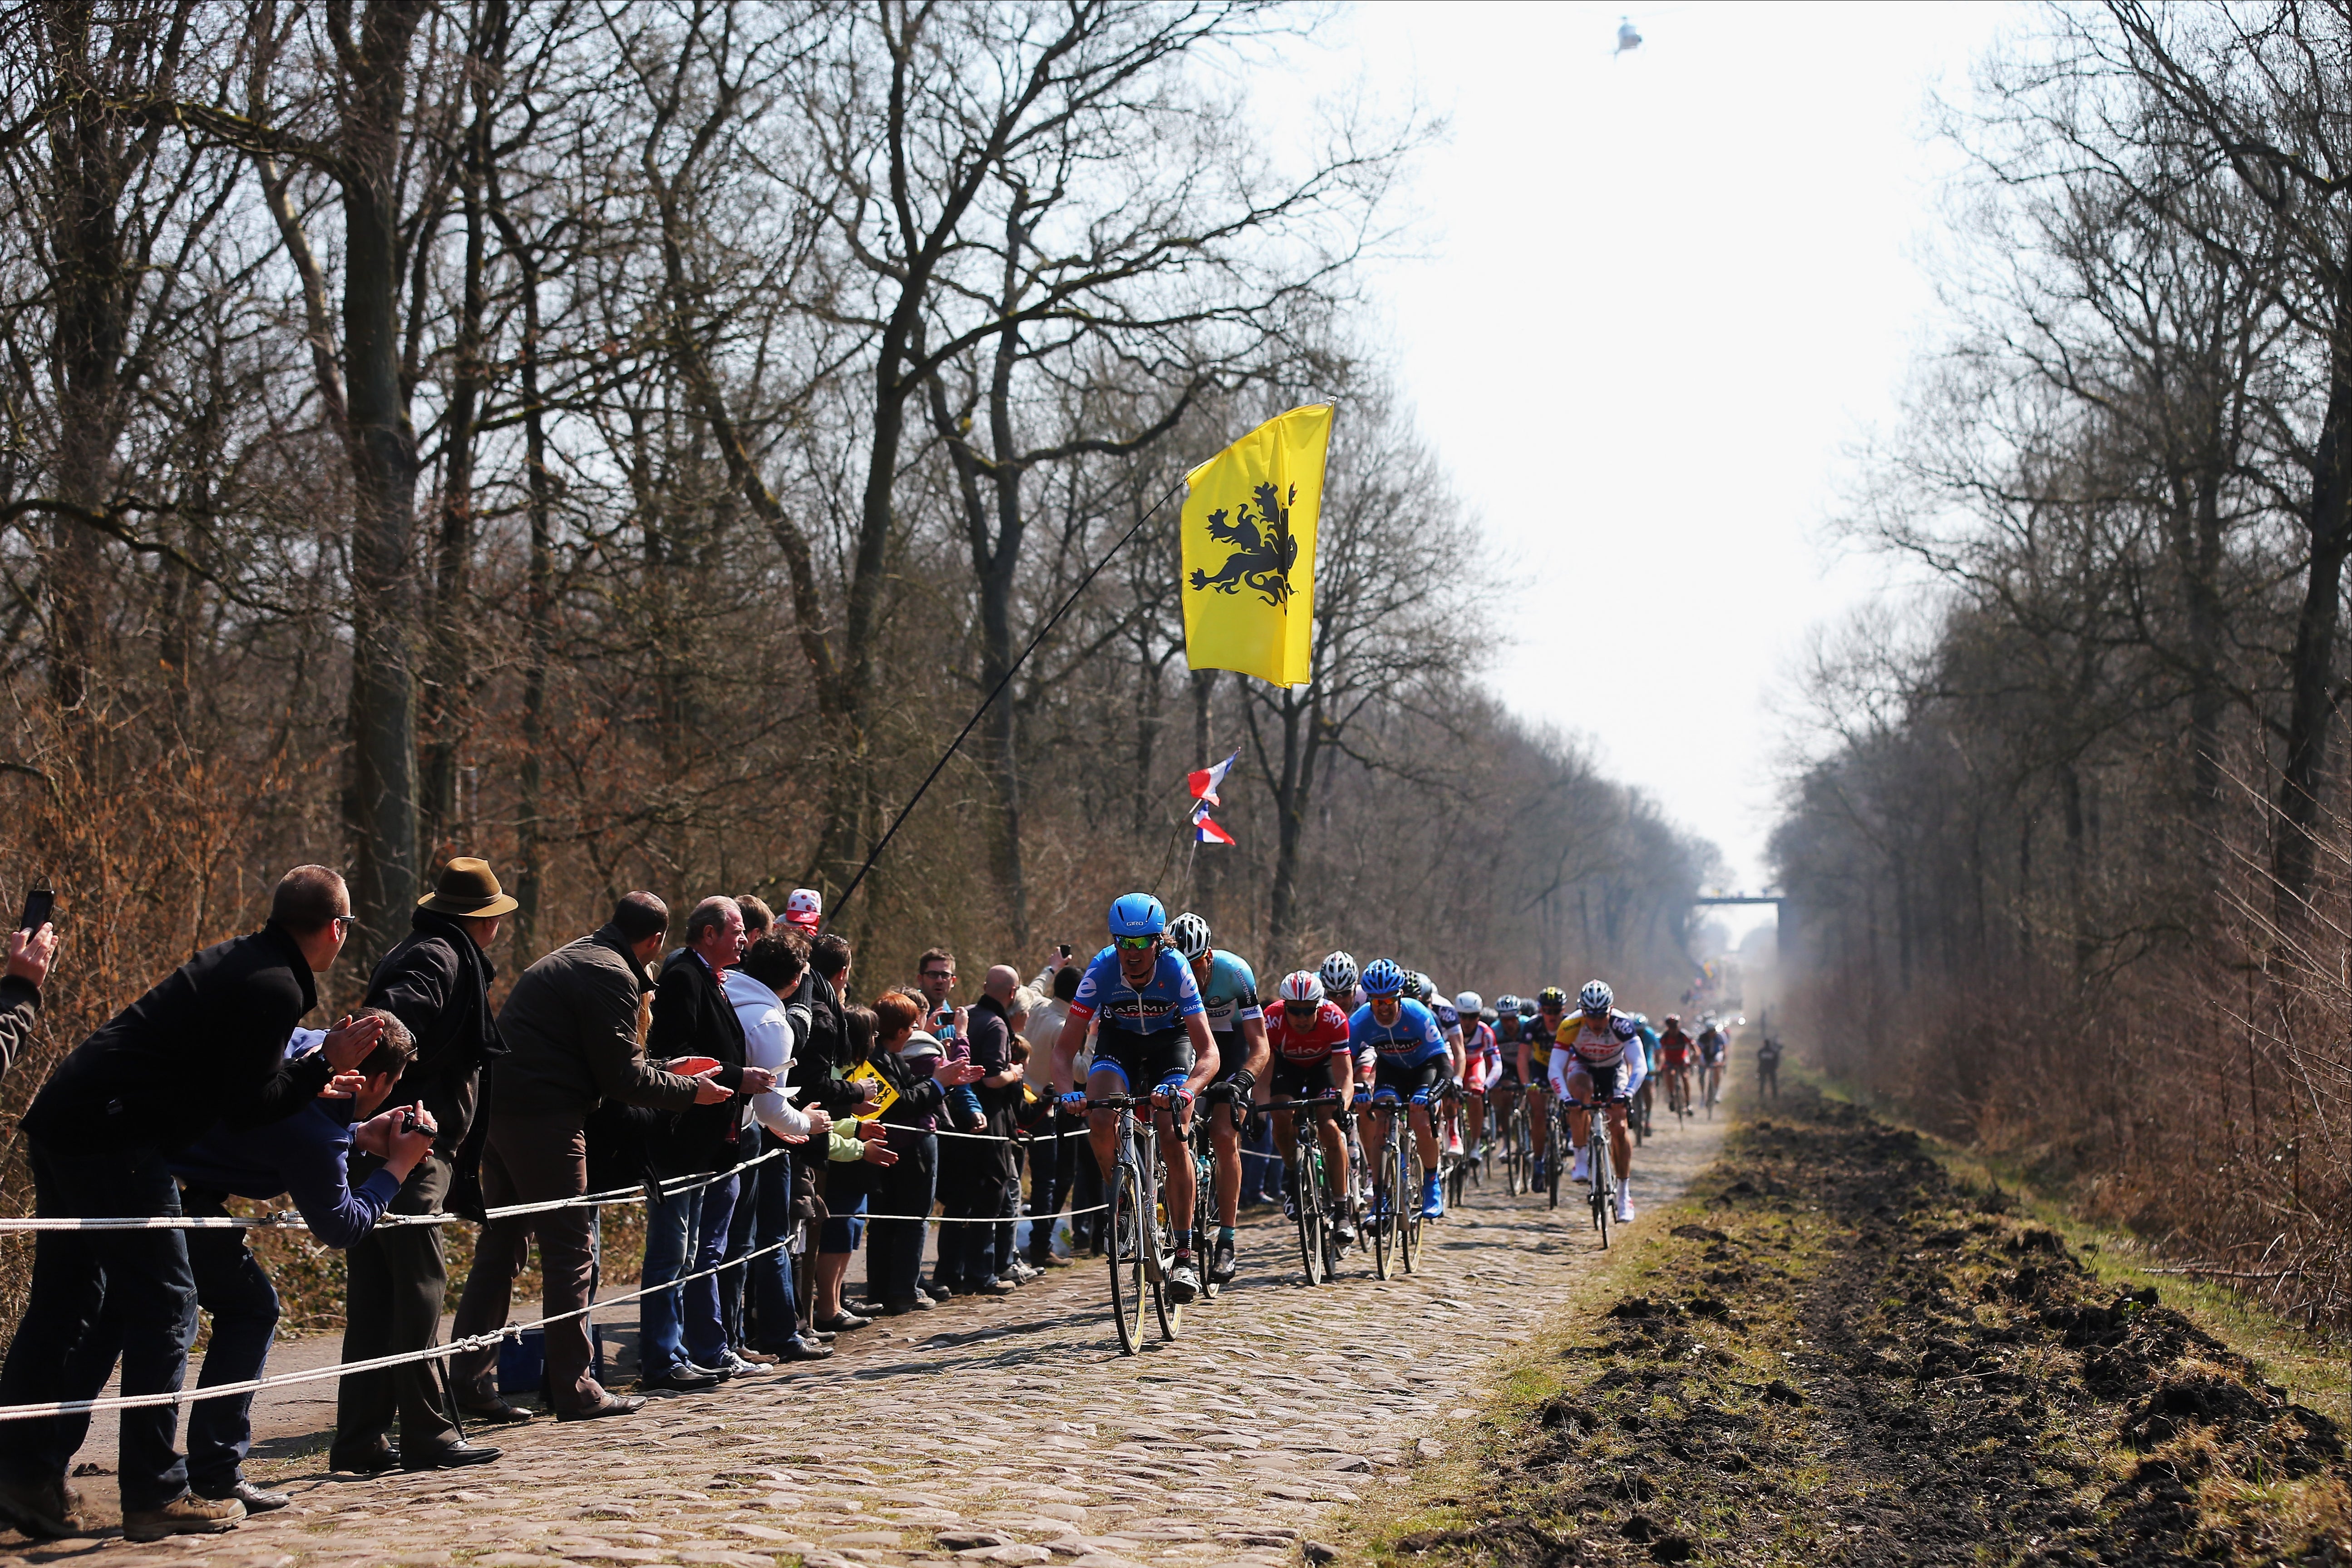 The Arenberg Forest comes at a crucial point in Paris-Roubaix